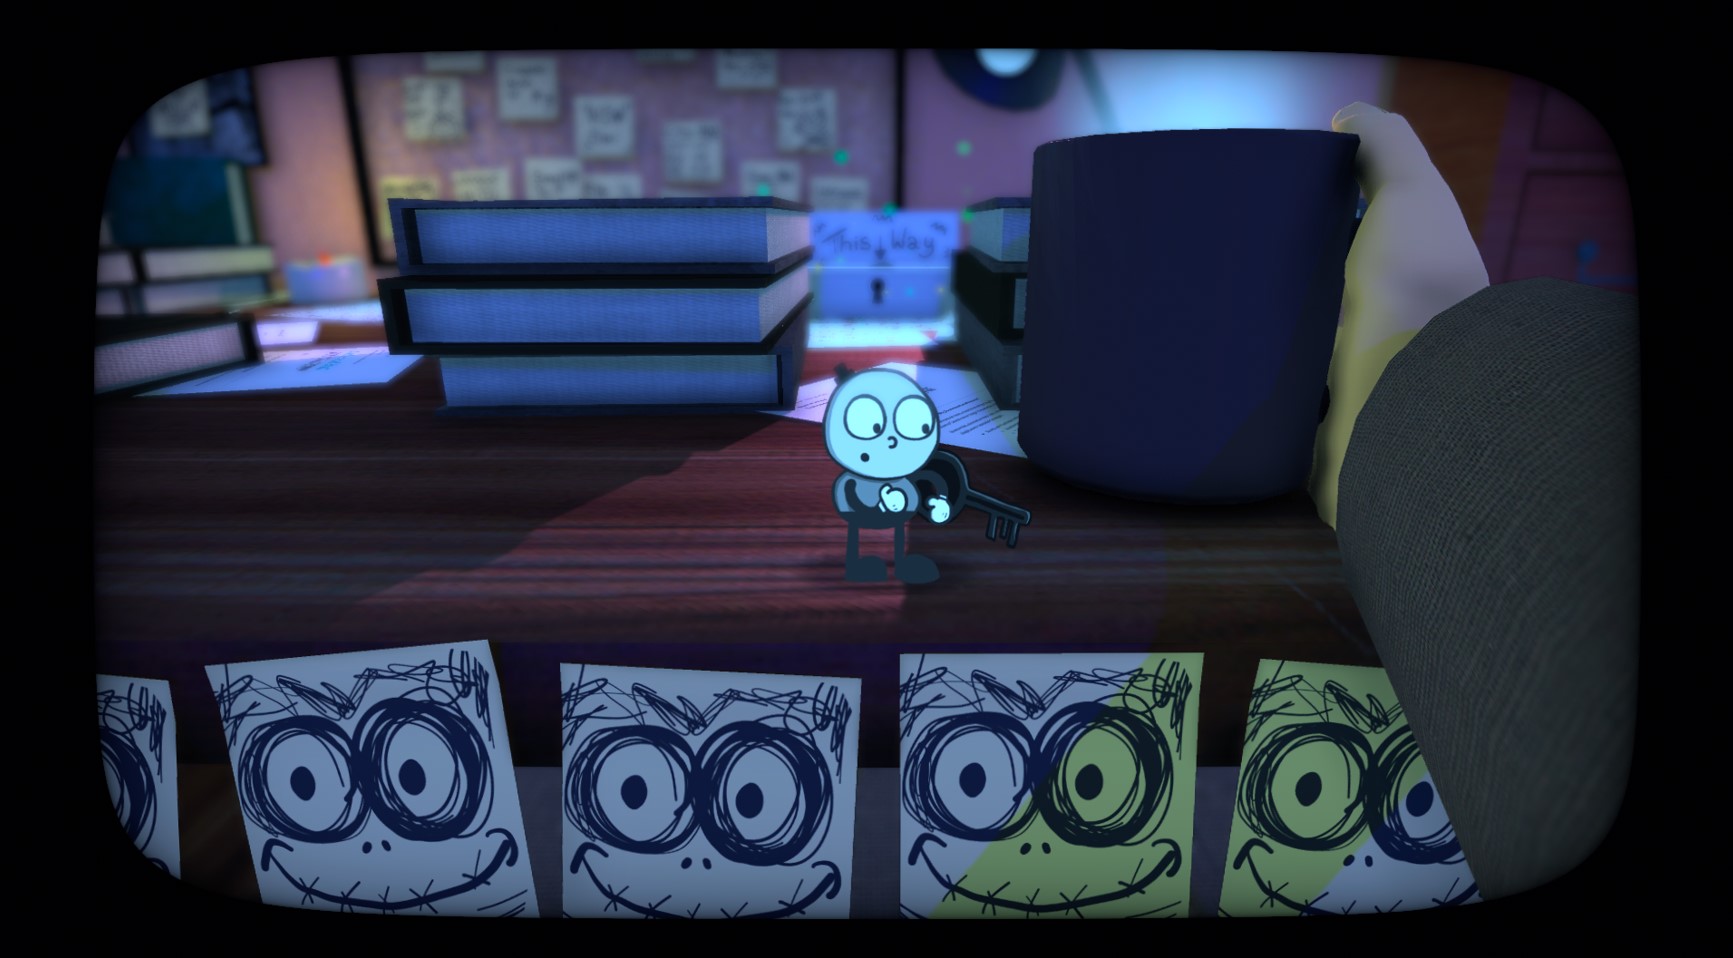 A cartoon character stood with a key on a desk. There are post-its of smiley scary faces on the edge of the desk. an arm rests on the desk cradling a mug. 